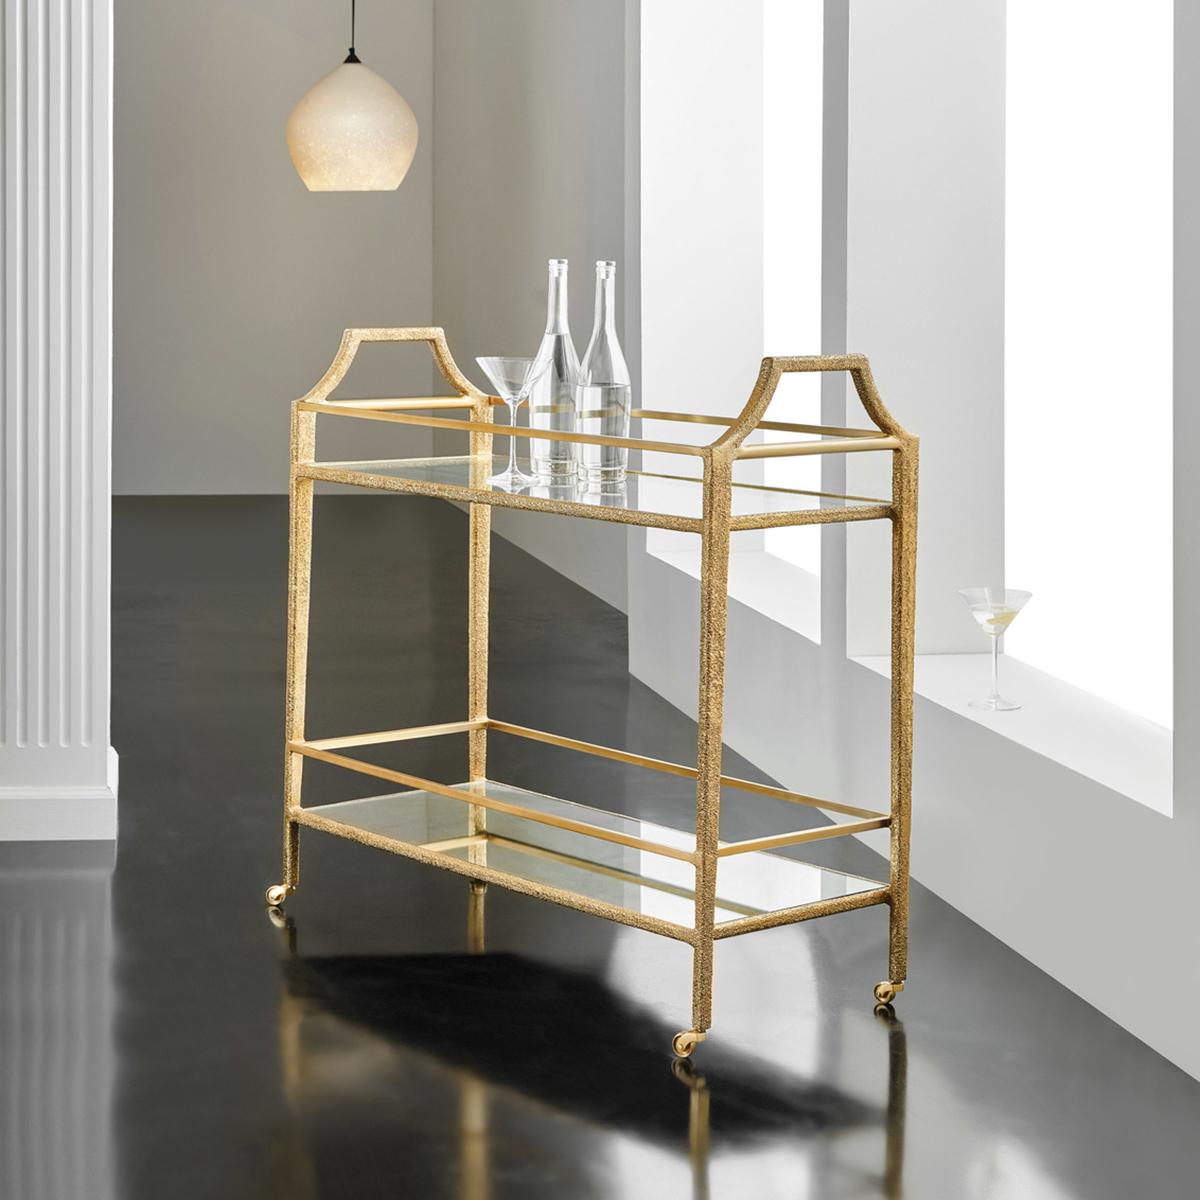 Modern Gilt Bar Cart with brass frame wrapped in textured gold with two shelves, tapered legs raised on brass casters. The texture appears to be like pointillism art.

Dimensions: 37.5